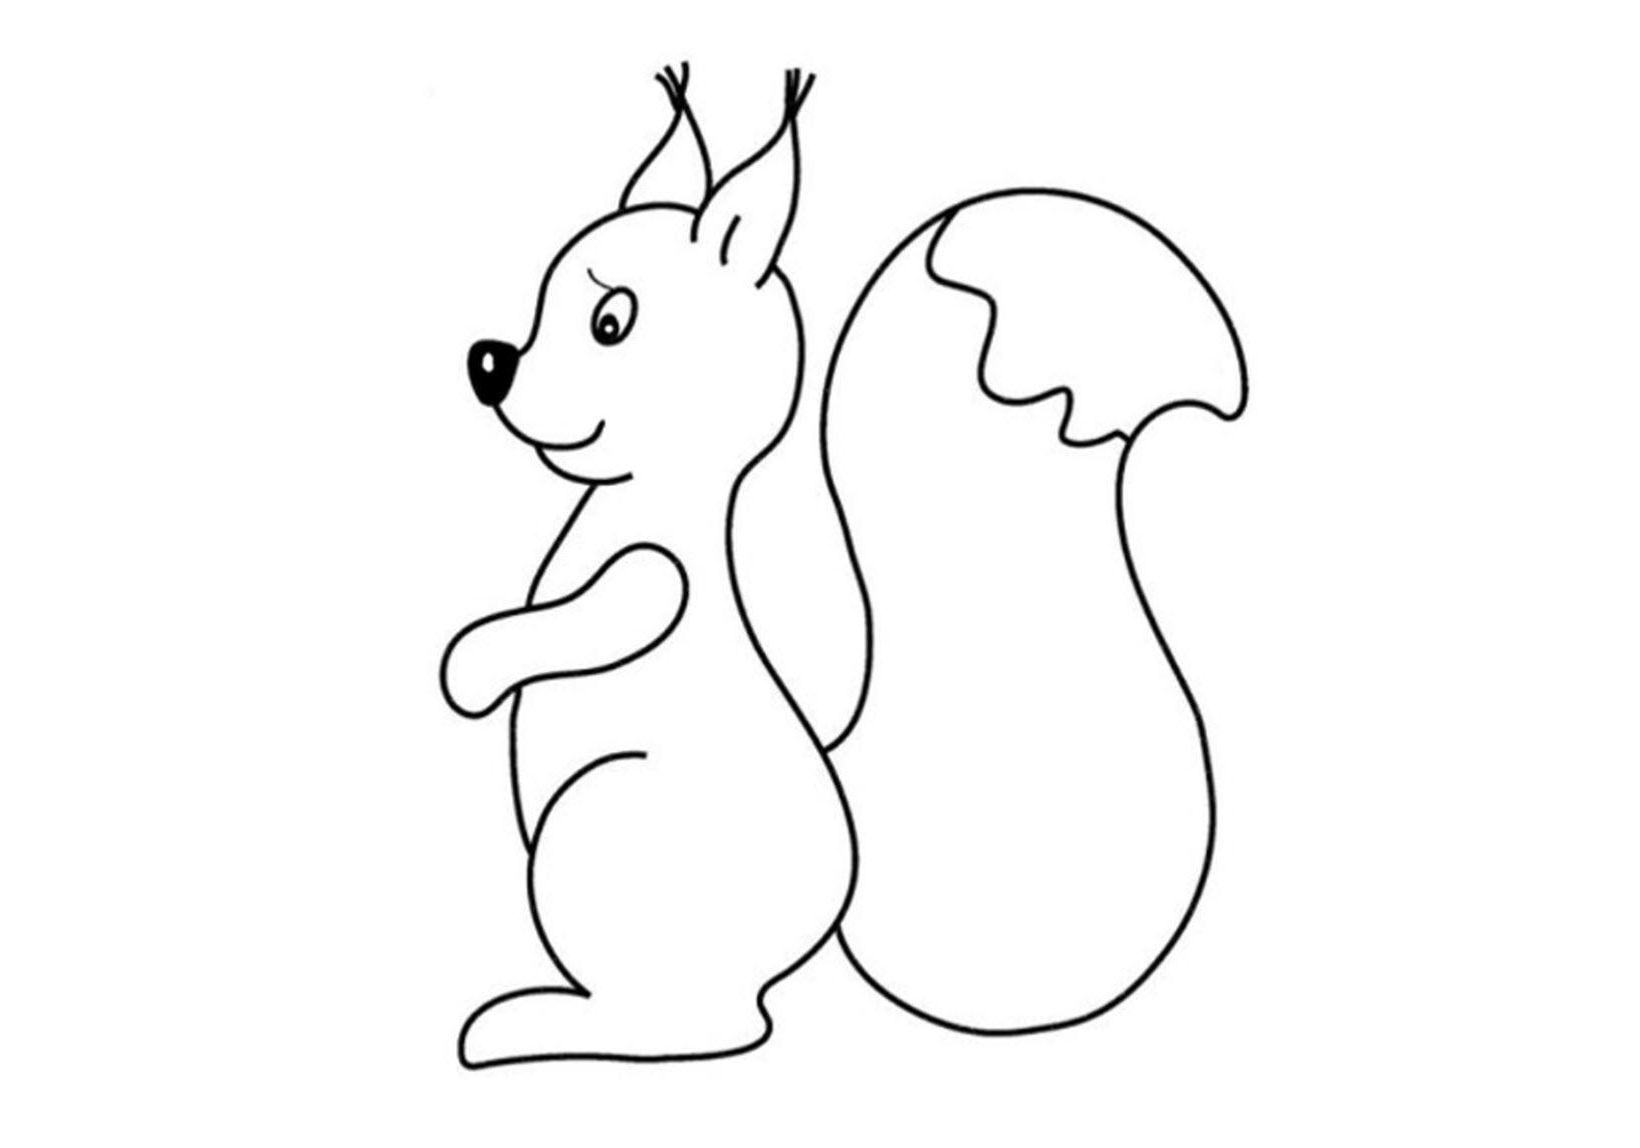 Fun squirrel coloring book for 2-3 year olds